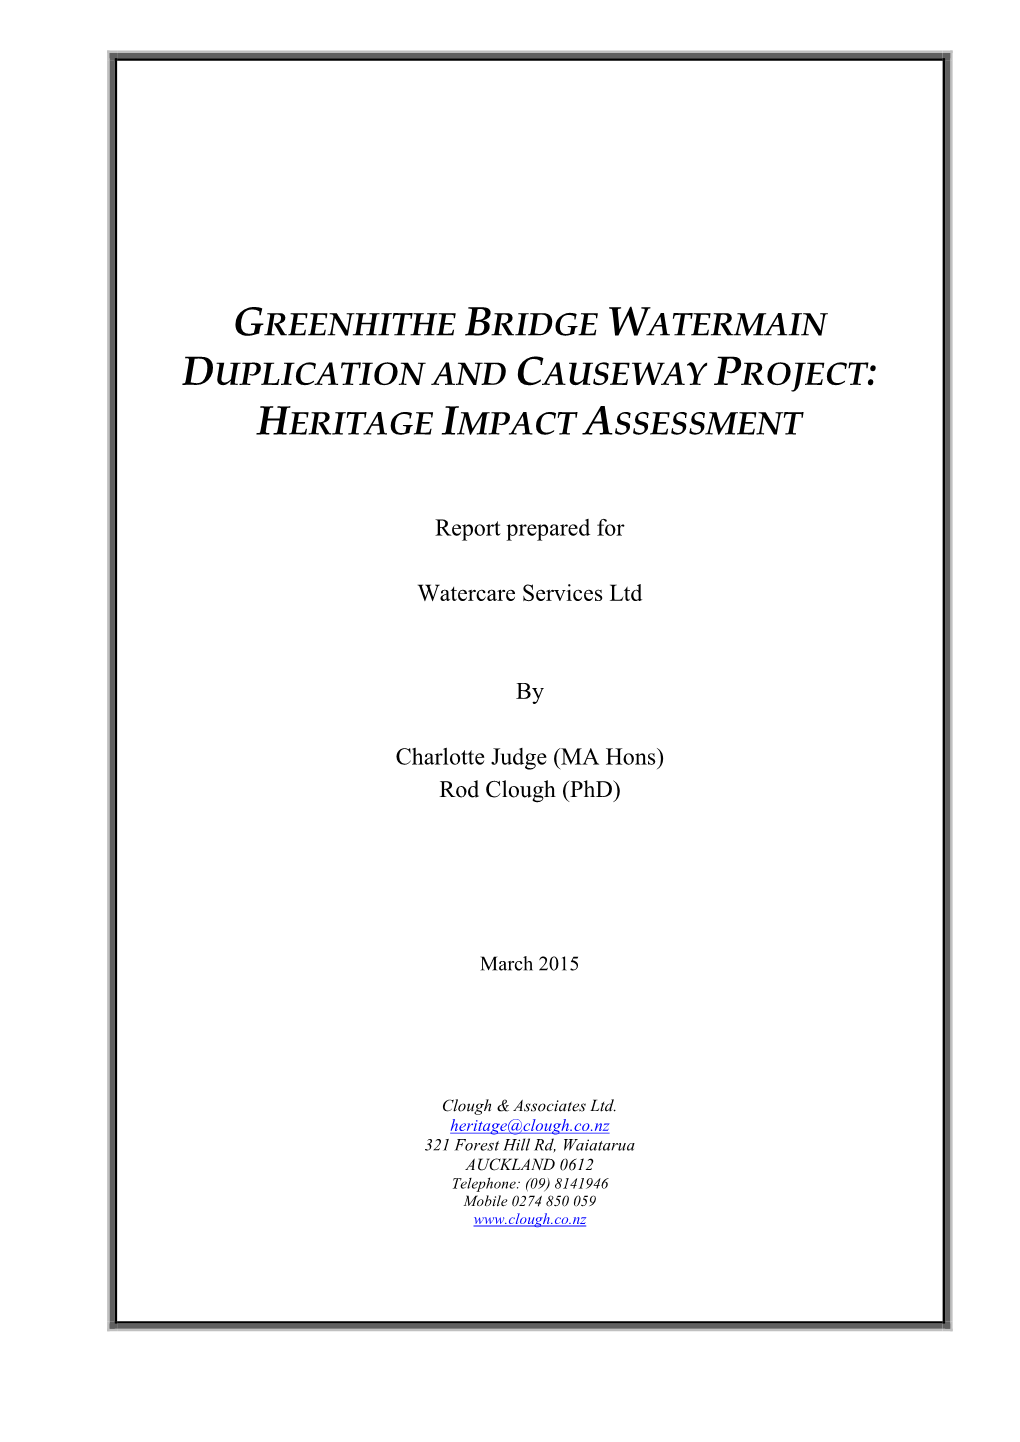 Greenhithe Bridge Watermain Duplication and Causeway Project: Heritage Impact Assessment